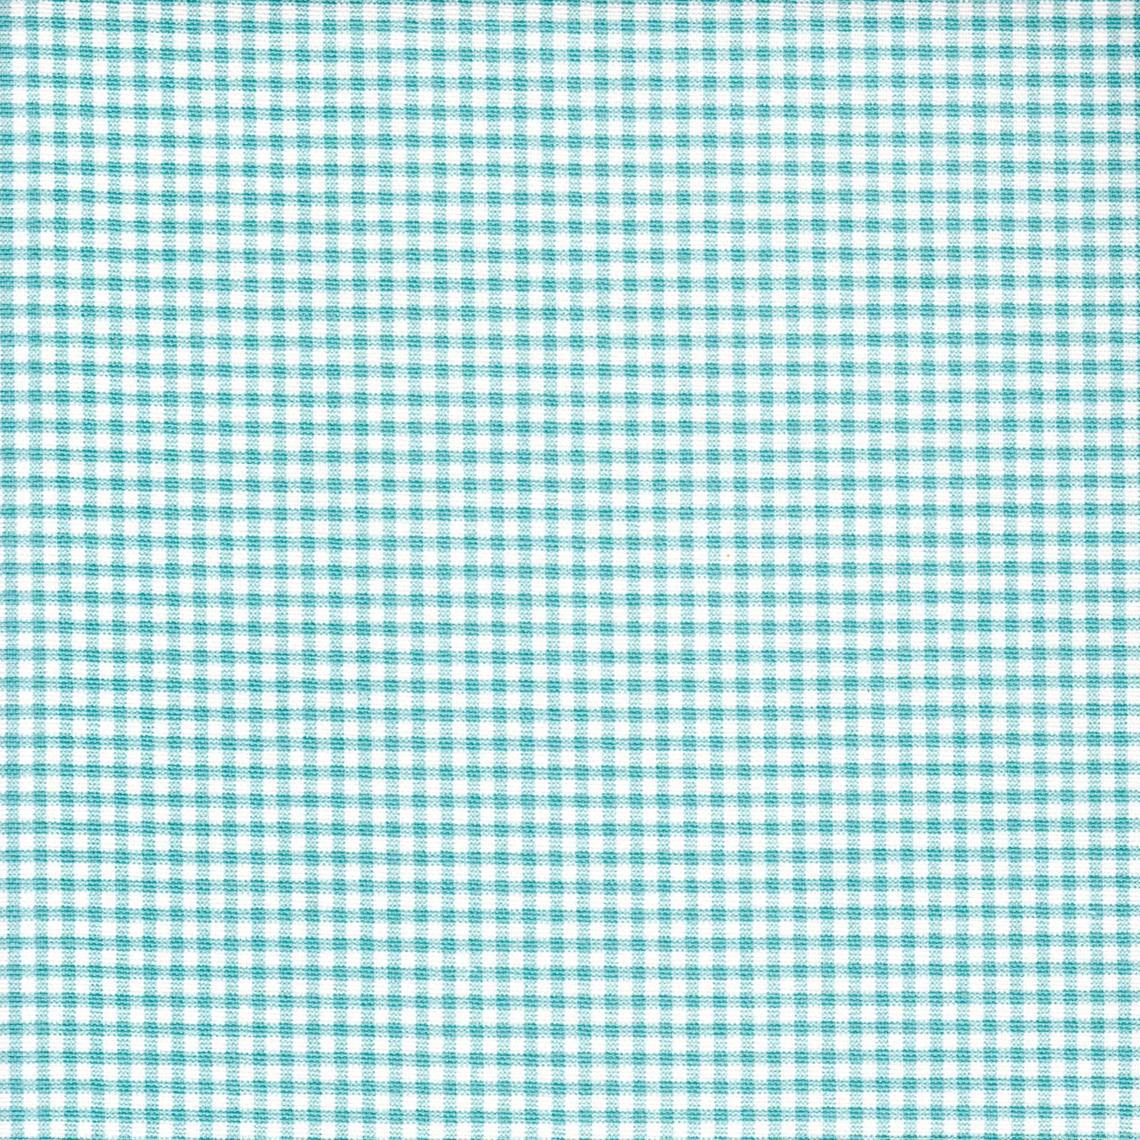 tailored crib skirt in farmhouse turquoise blue gingham check on cream